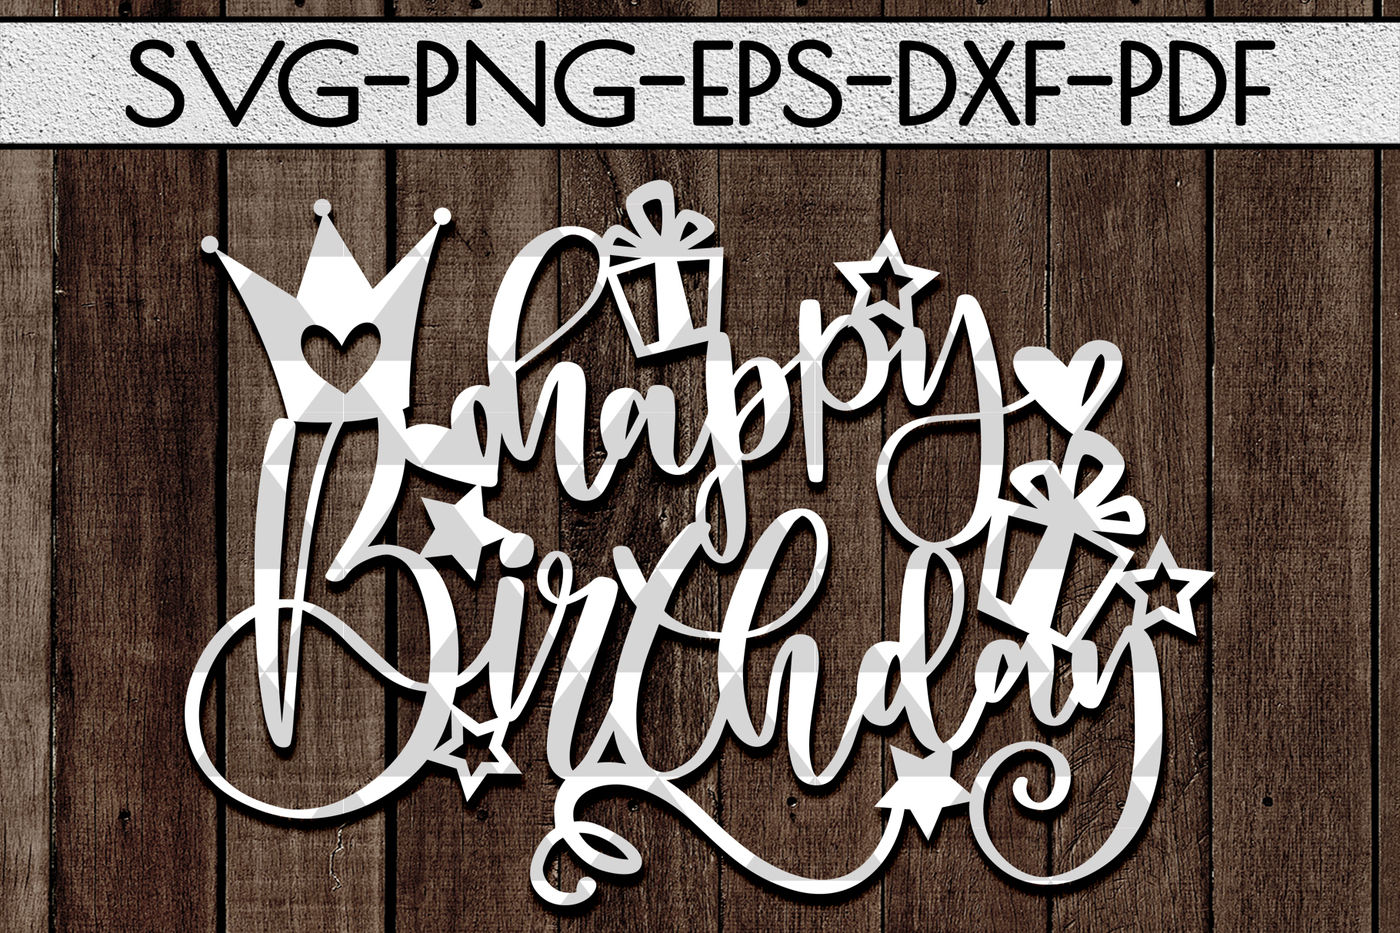 Jpeg Pdf Clipart happy birthday in SVG EPS PNG Birthday Card Design Resources